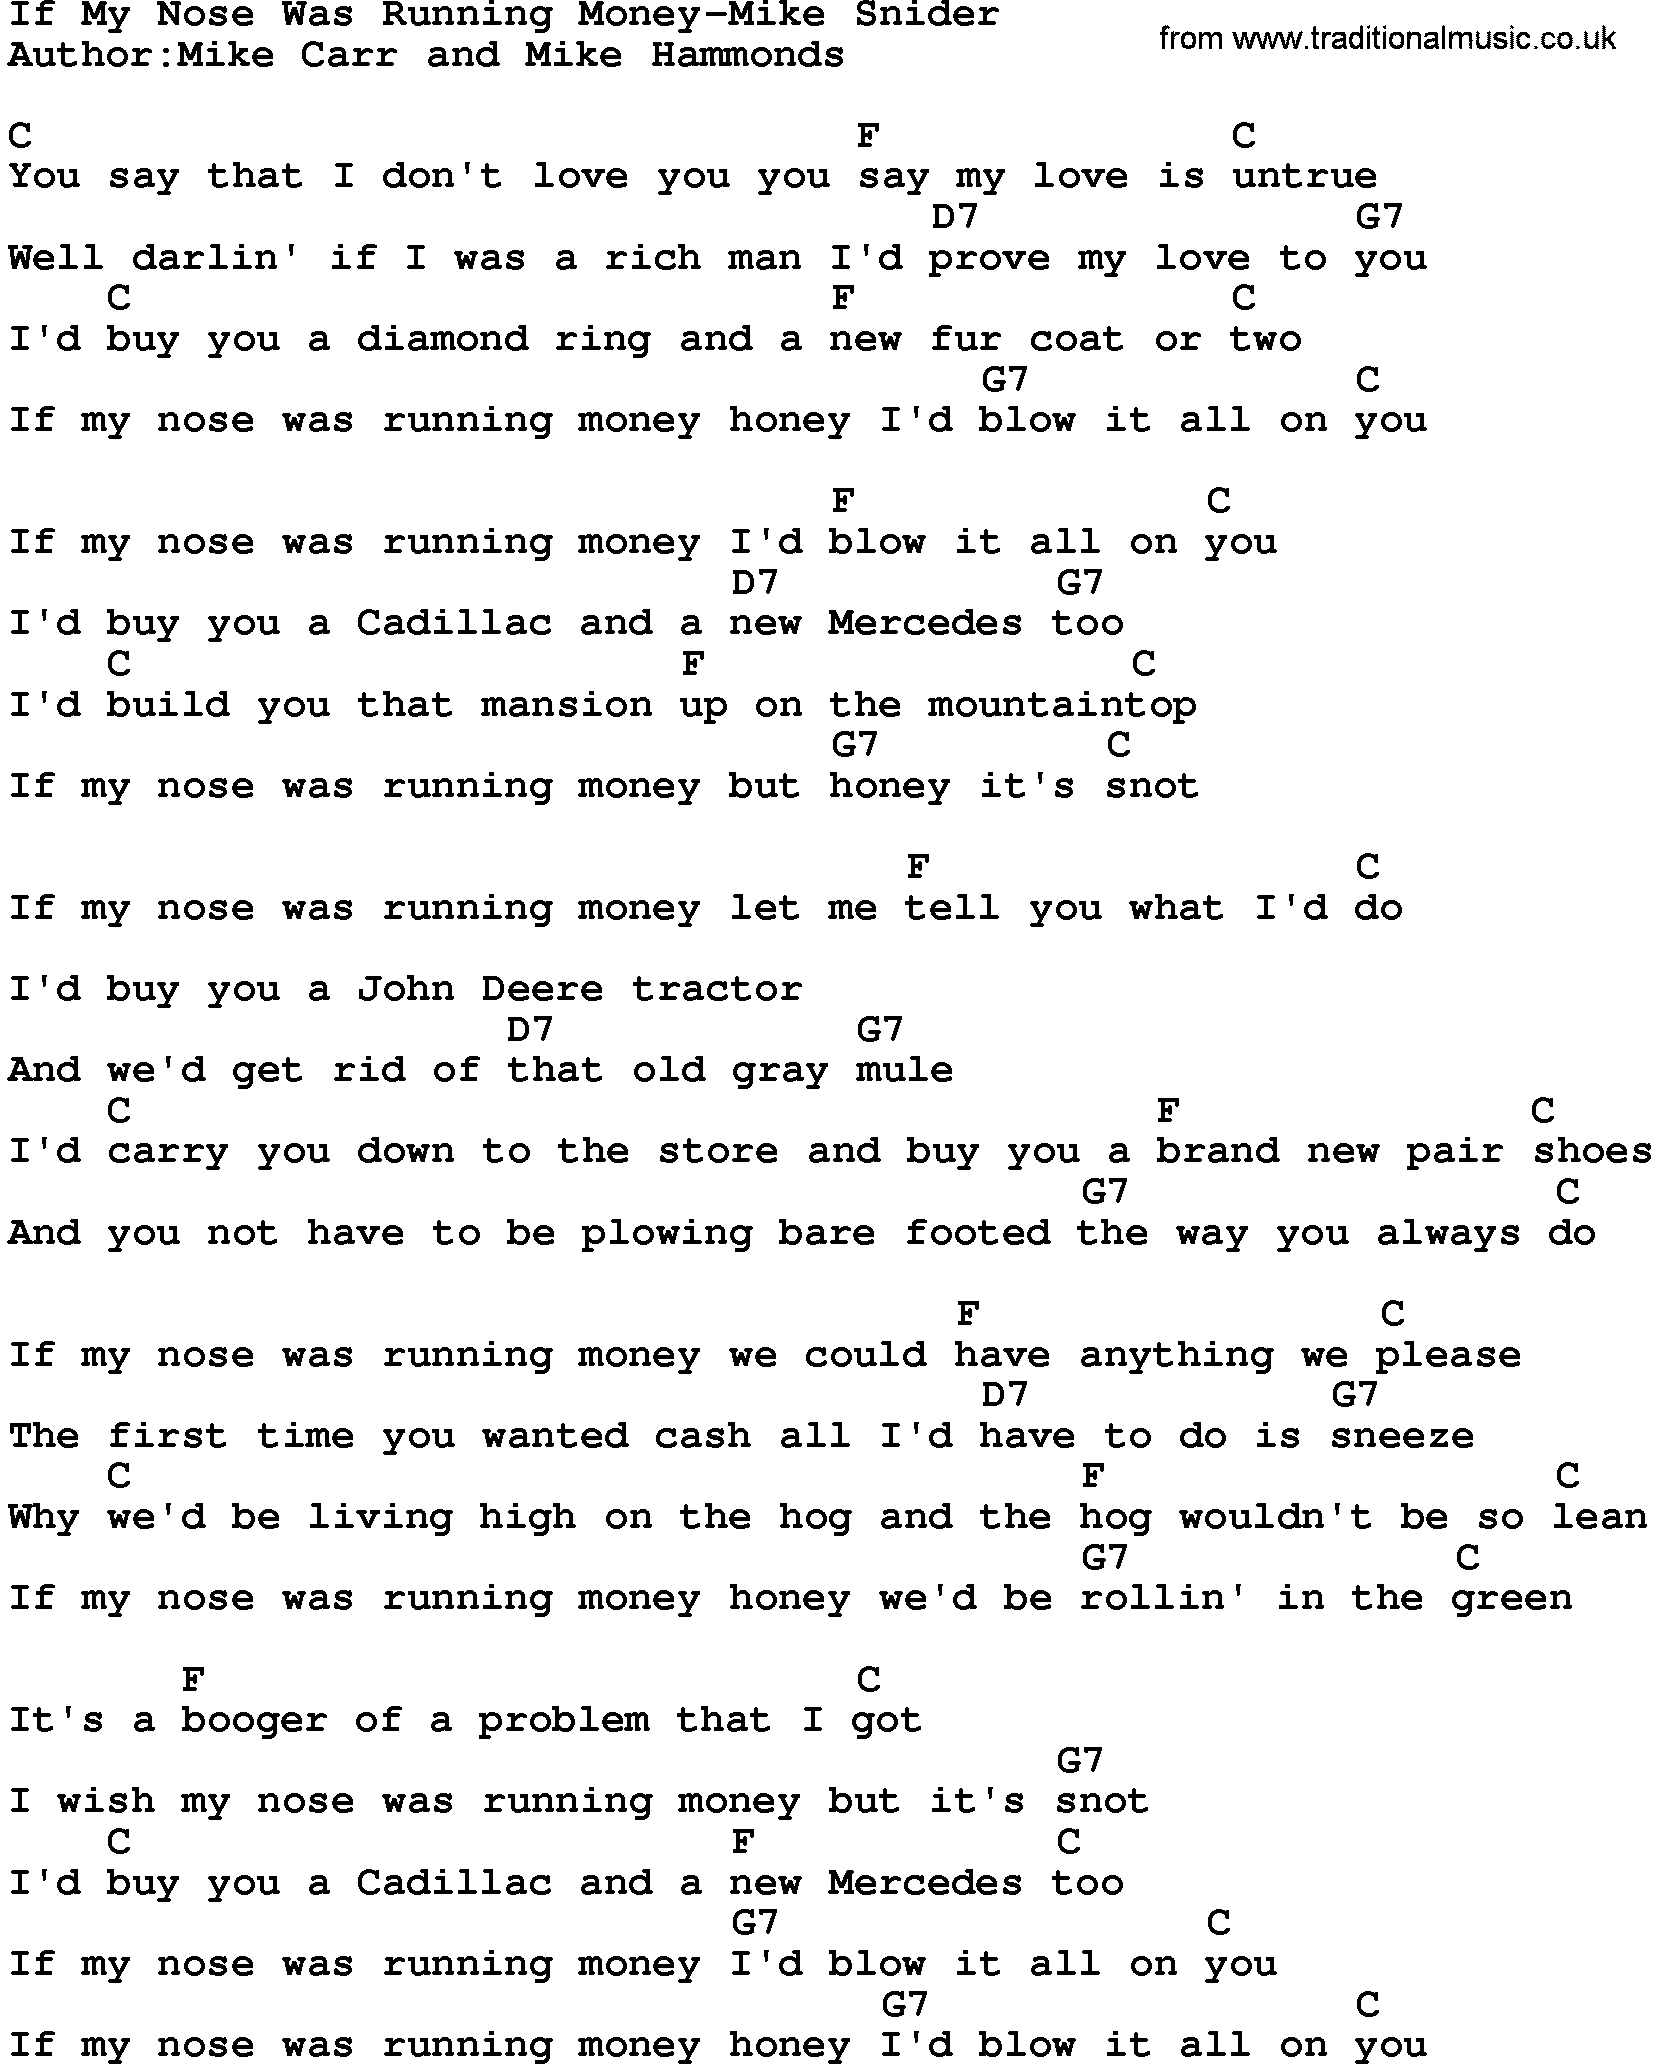 Country music song: If My Nose Was Running Money-Mike Snider lyrics and chords